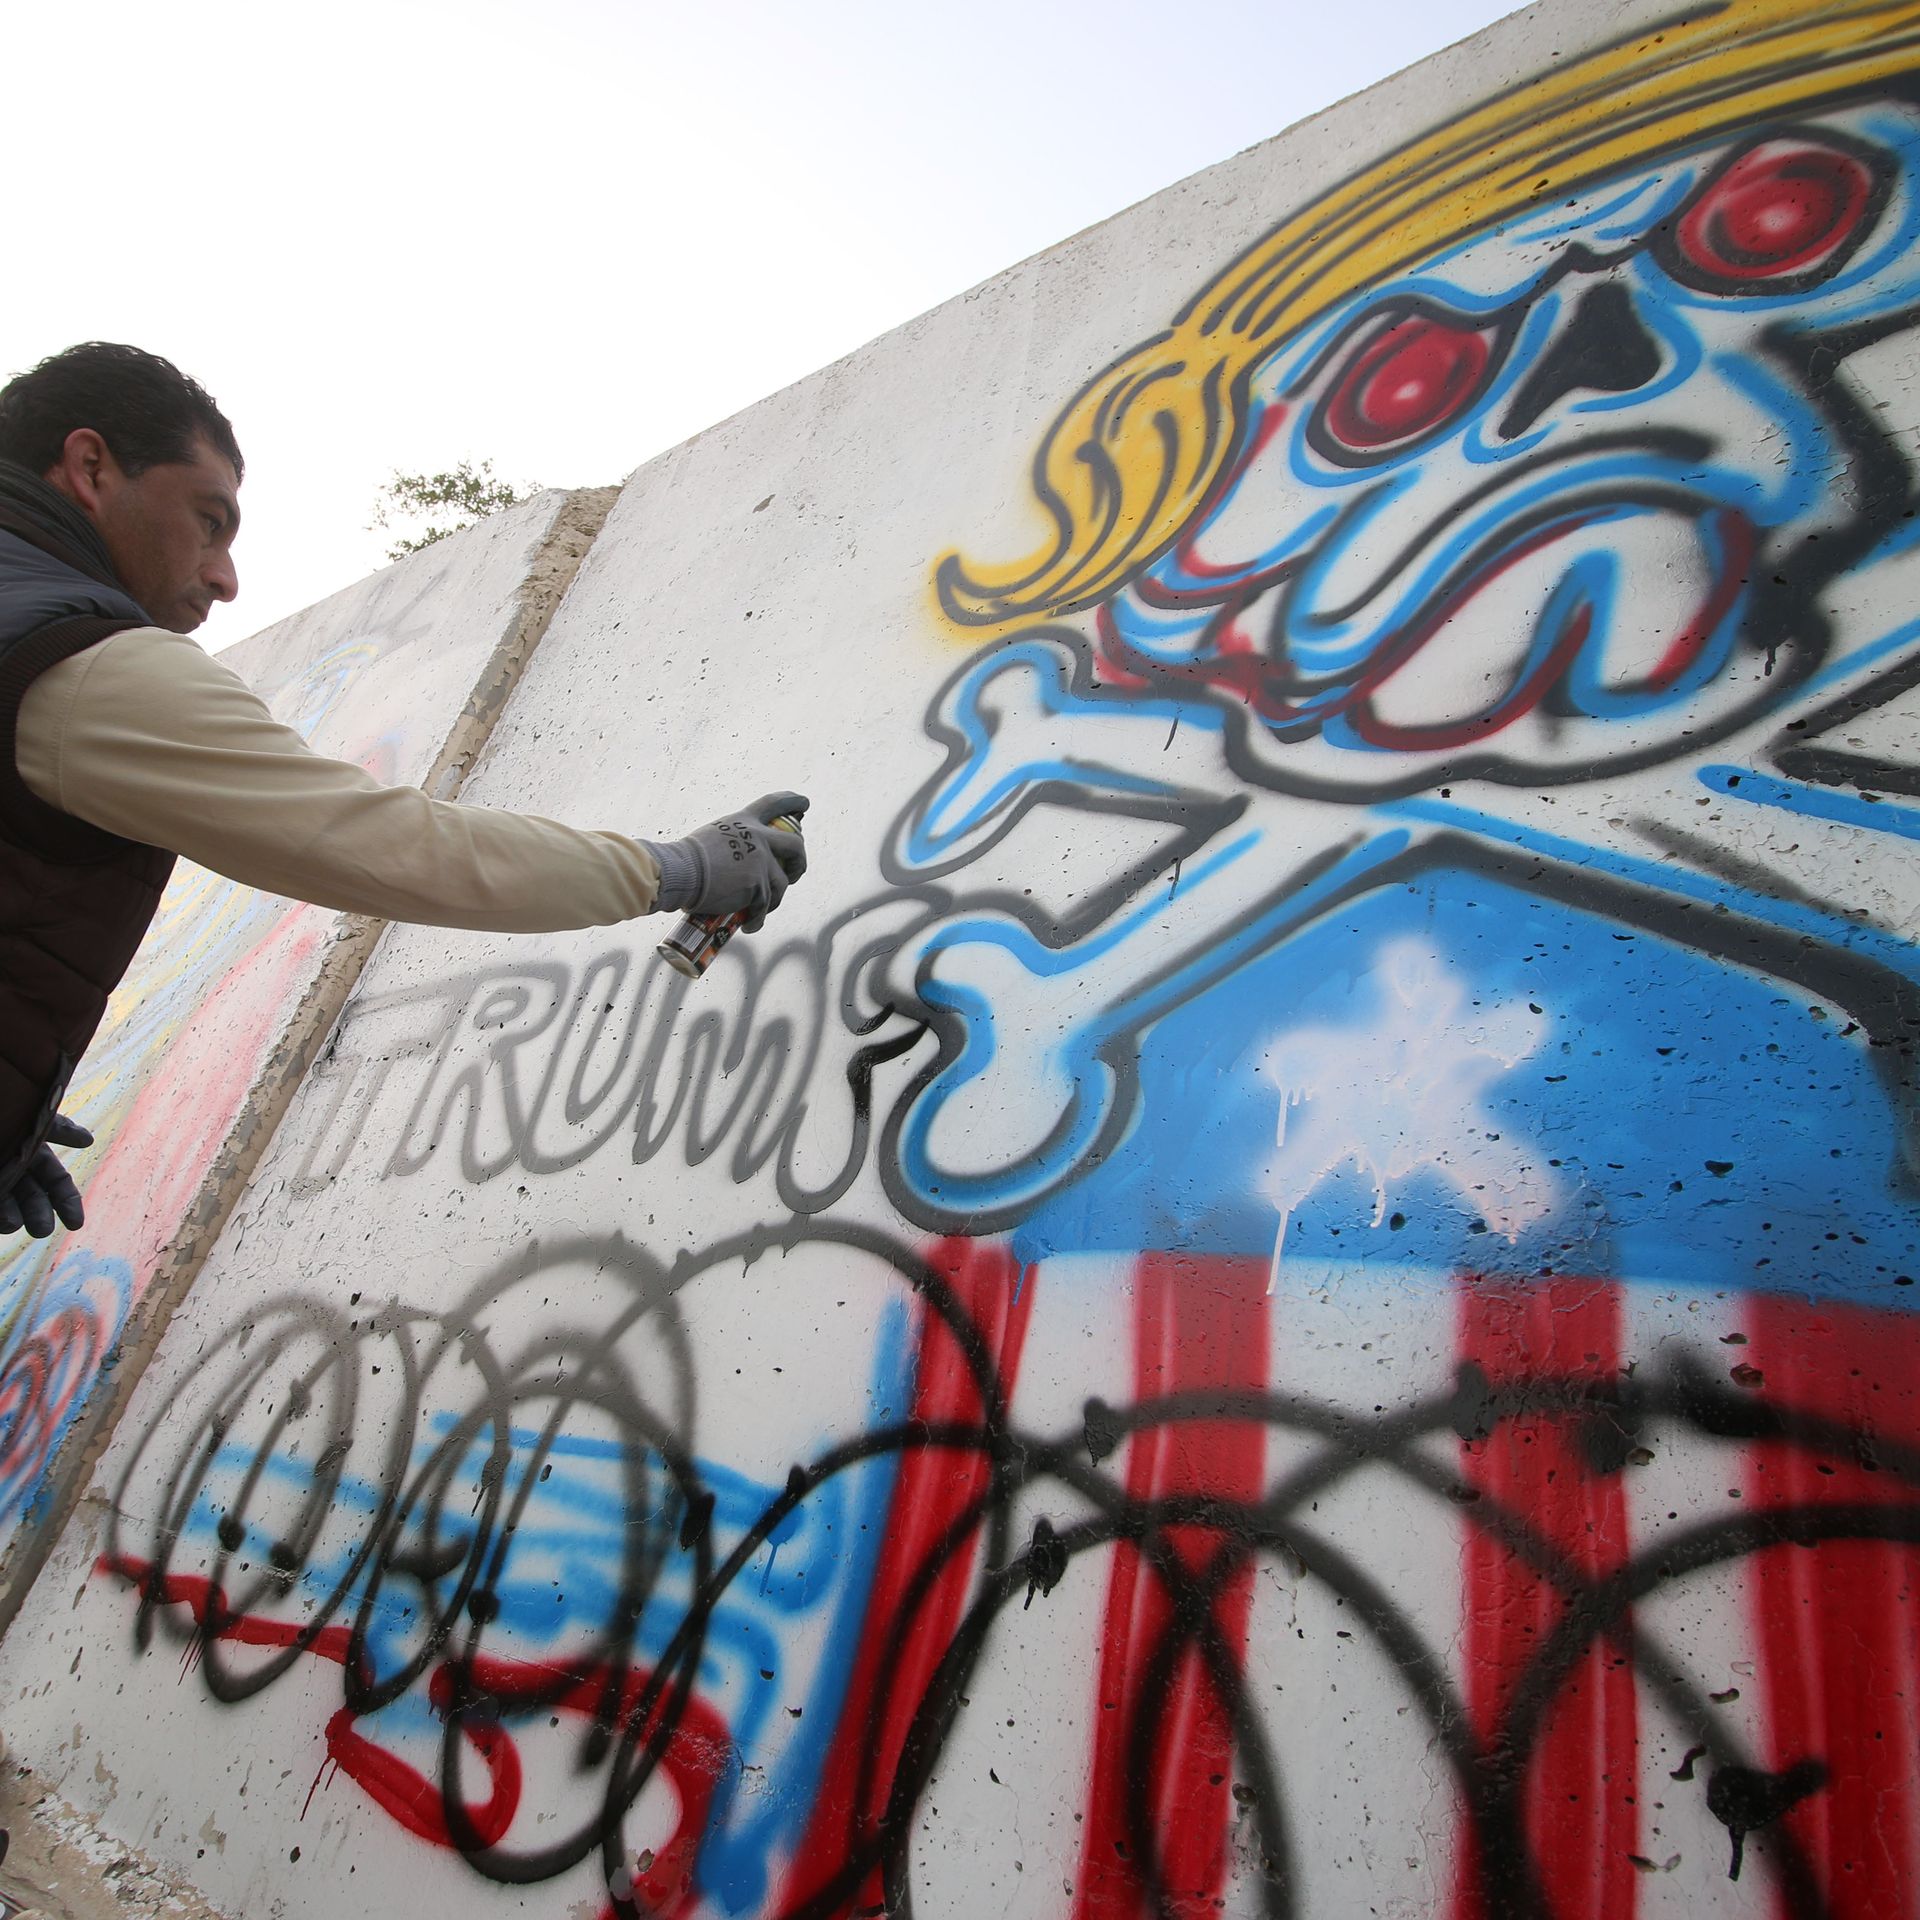 An Iraqi graffiti artist sprays a cement wall with anti-US President Donald Trump slogans in the southern Iraqi city of Basra on February 2, 2017.